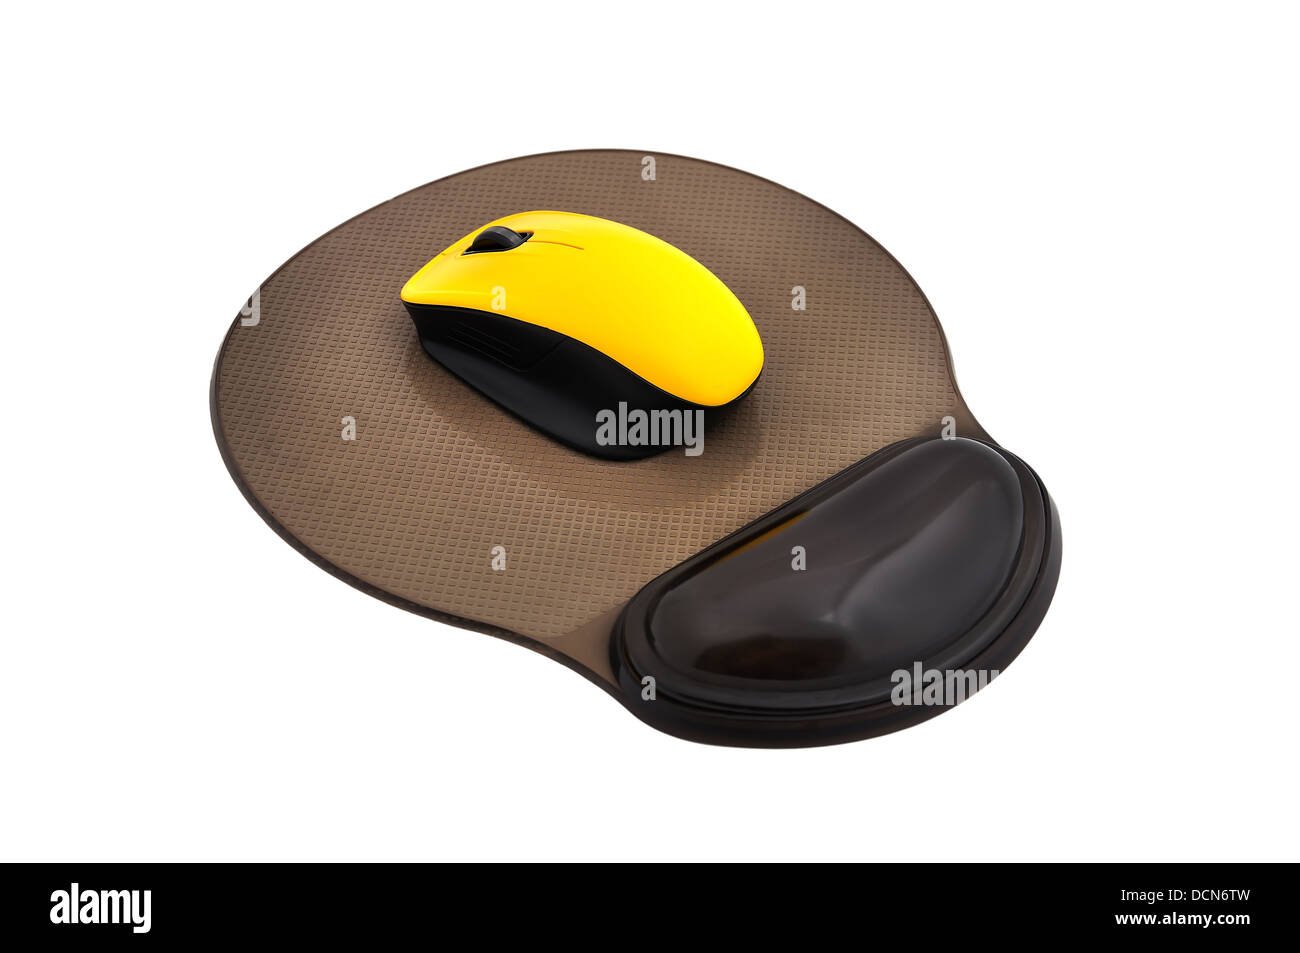 wireless mouse and mause pad Stock Photo